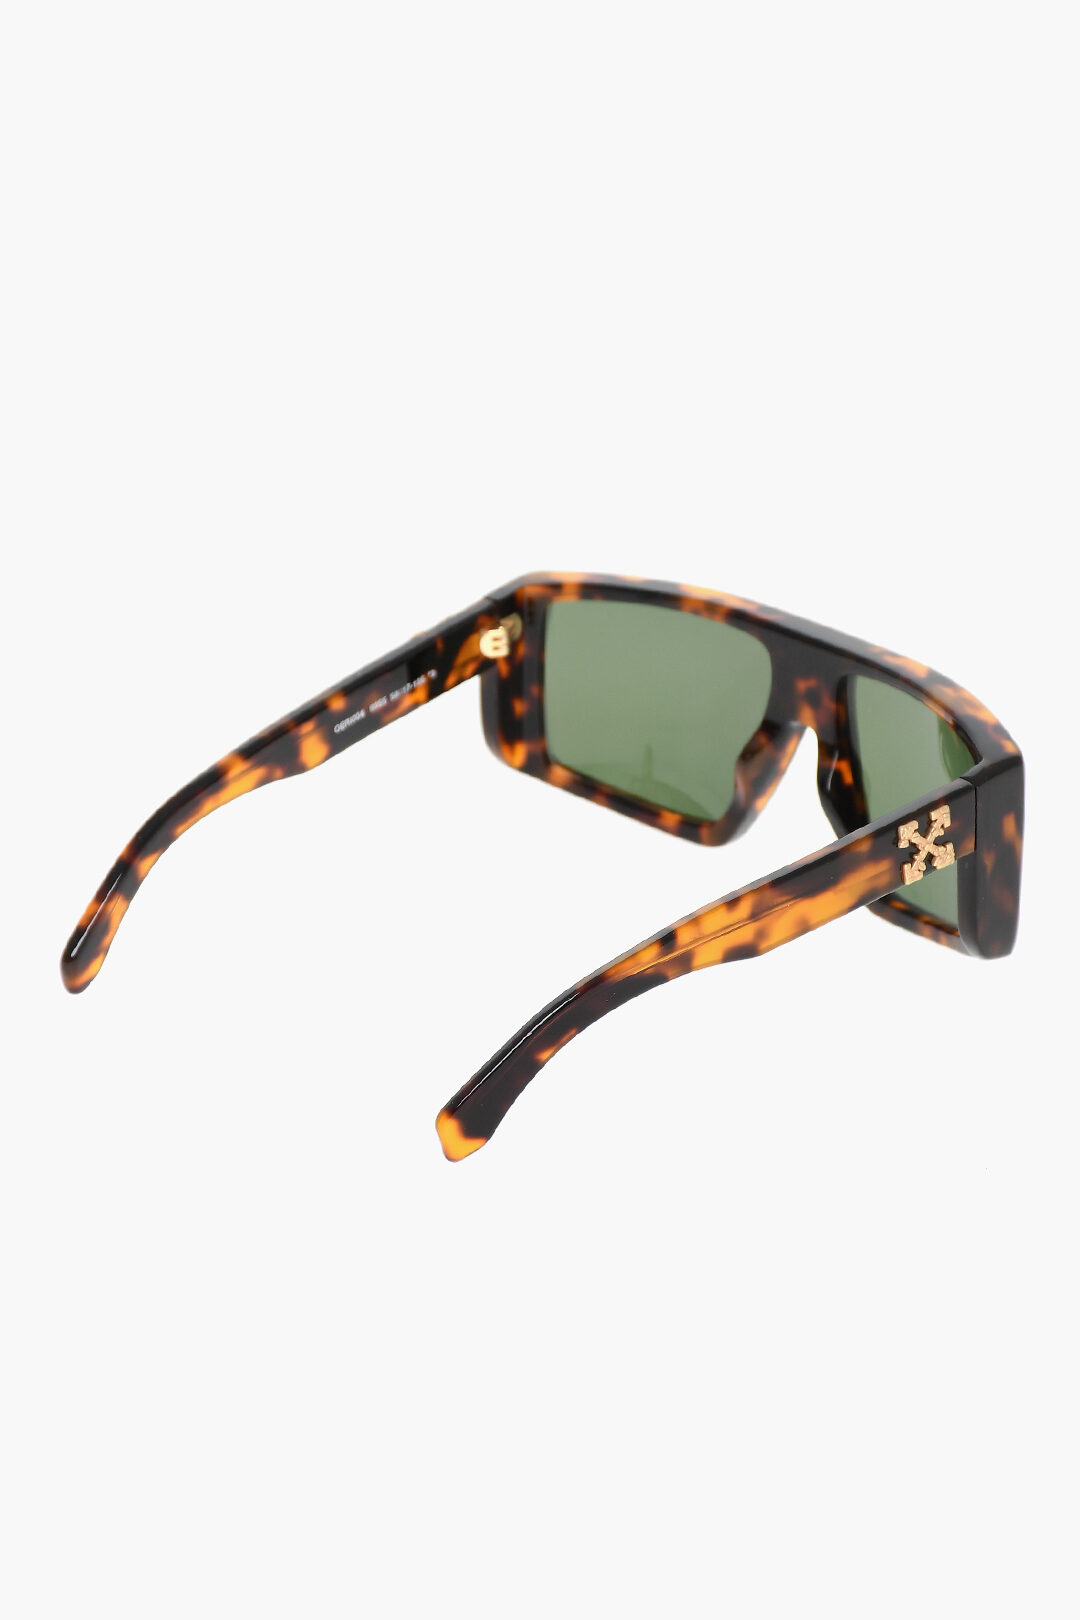 Sunglasses Alps with Square Frame Tortoiseshell Effect Size unica